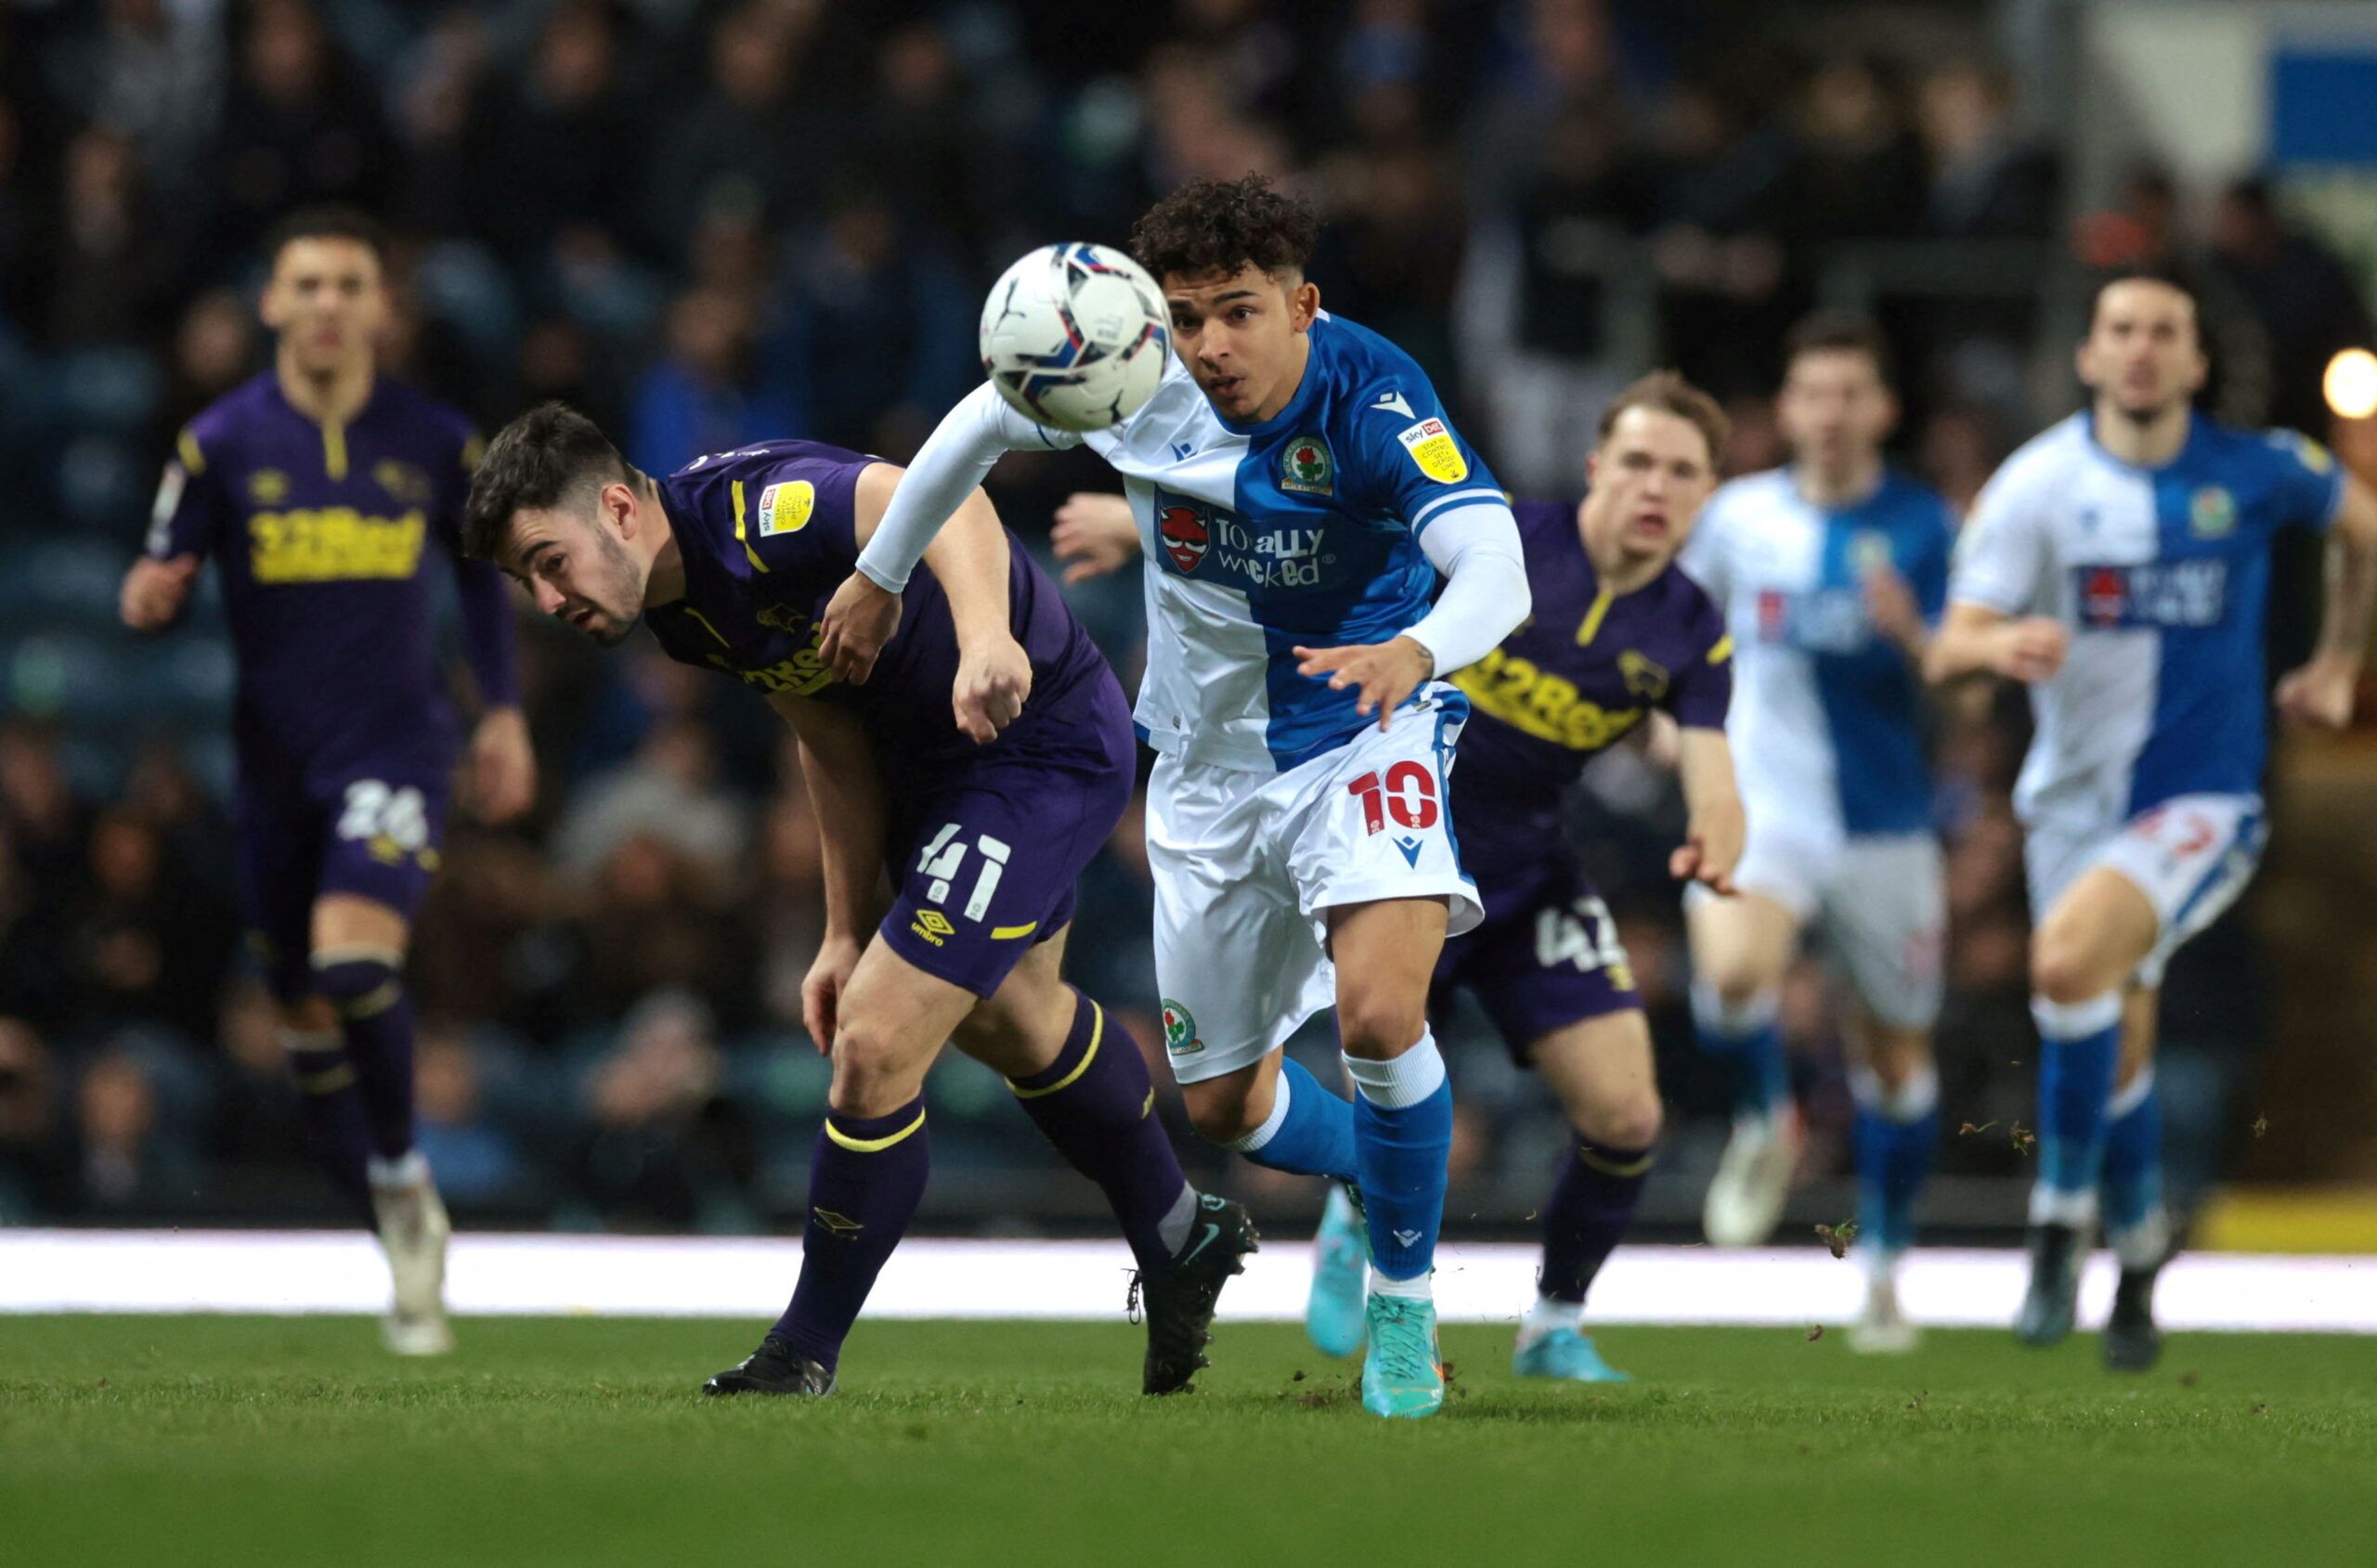 Soccer Football - Championship - Blackburn Rovers v Derby County - Ewood Park, Blackburn, Britain - March 15, 2022  Derby County?s Eiran Cashin in action with Blackburn Rovers' Tyrhys Dolan  Action Images/Lee Smith  EDITORIAL USE ONLY. No use with unauthorized audio, video, data, fixture lists, club/league logos or 